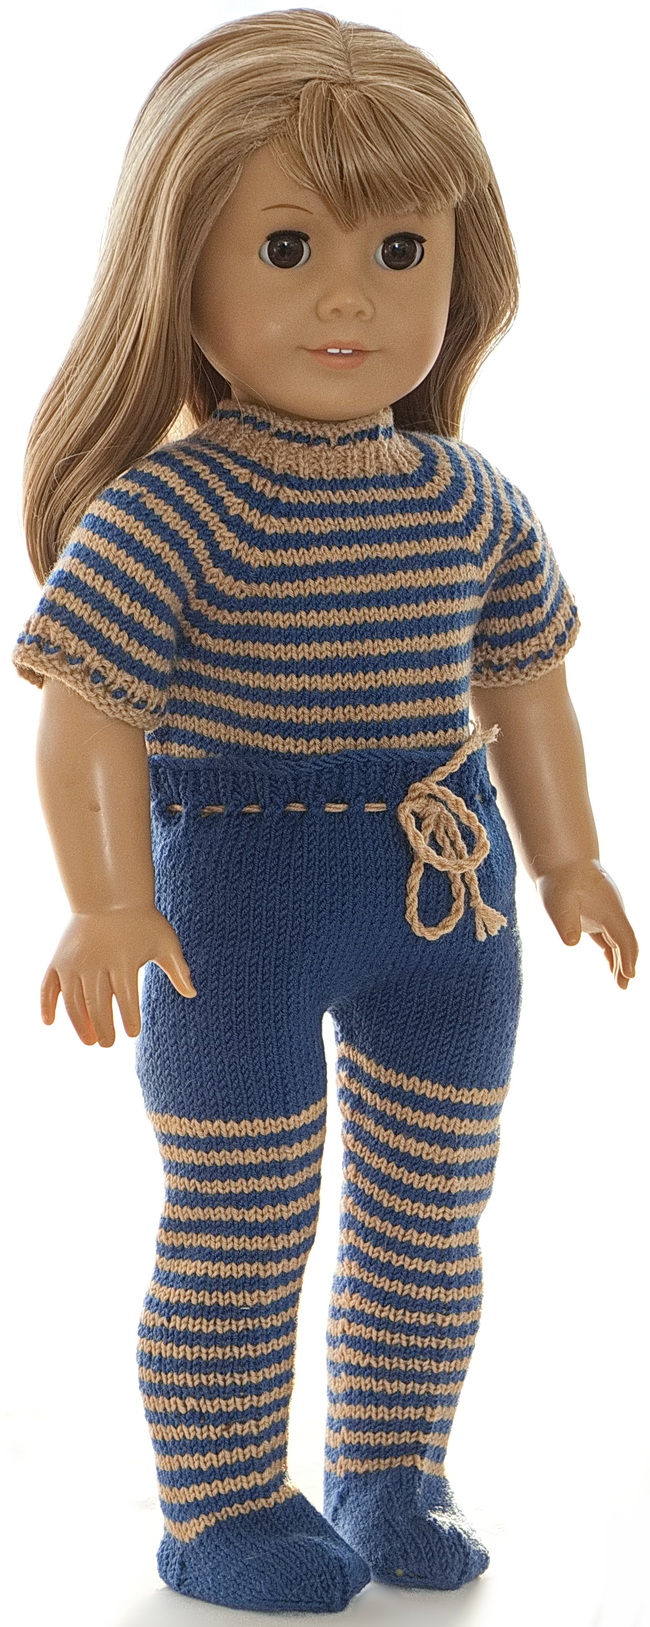 Nice and warm tights with legs knitted in stripes like stripes for the sweater fit these clothes well.   The pants and feet are knitted in blue.